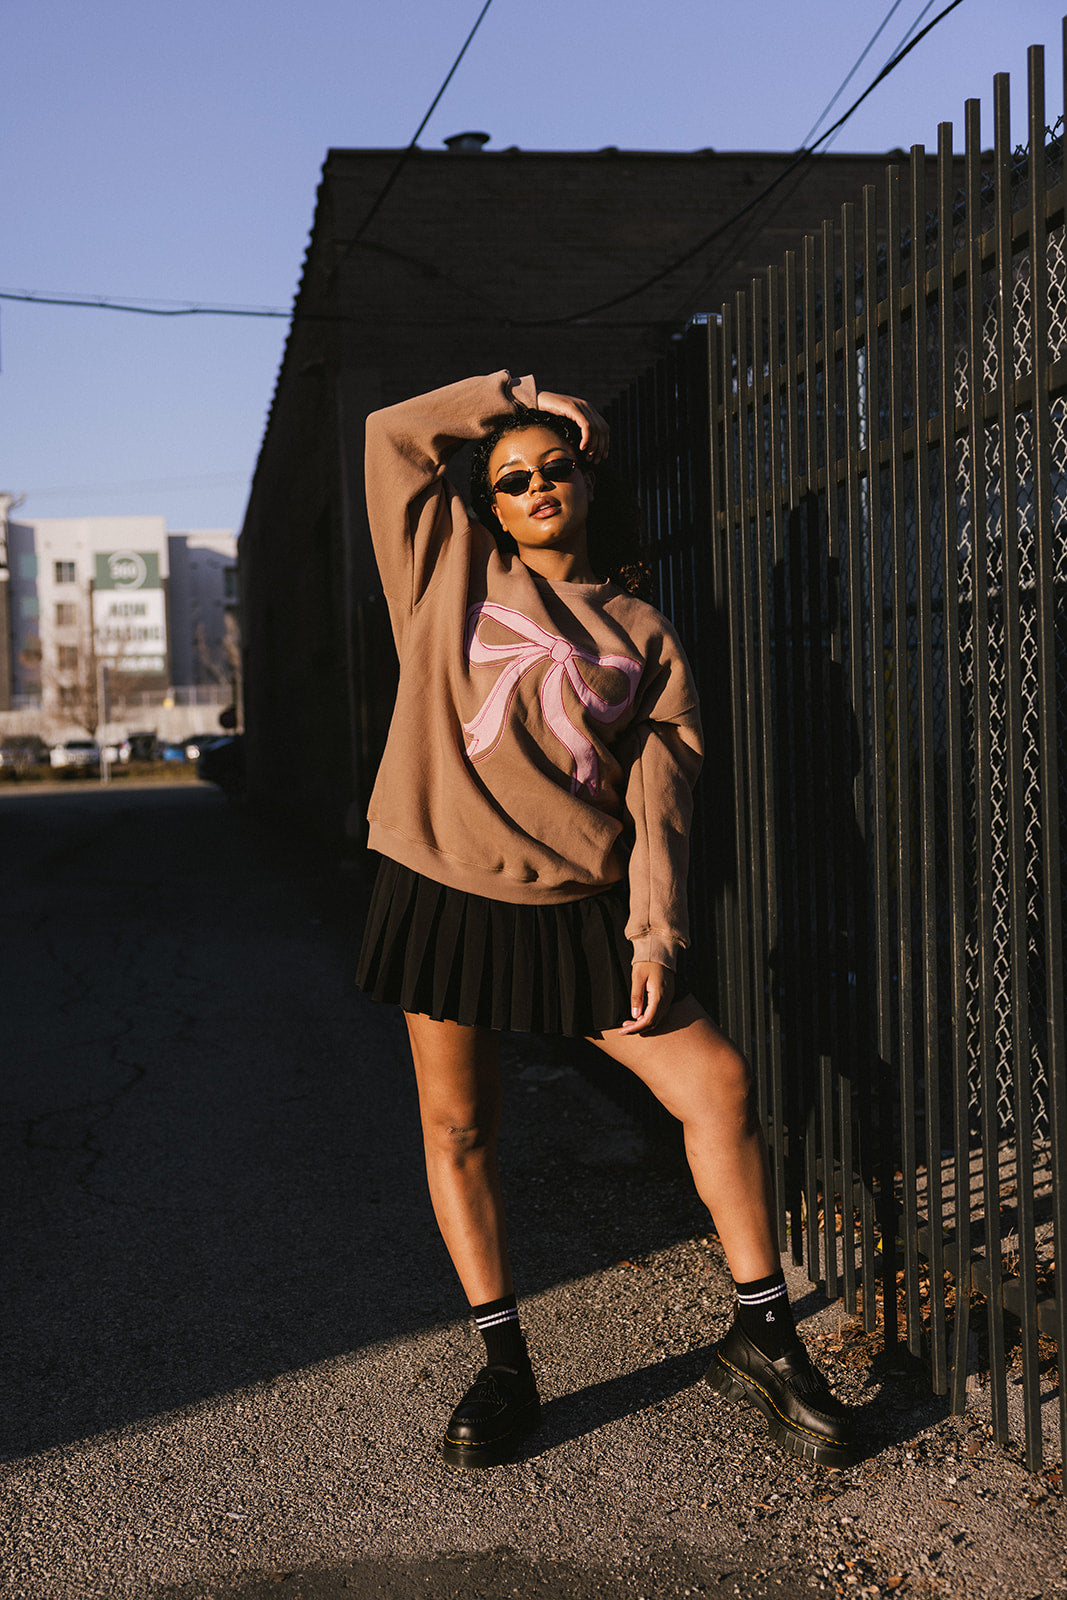 The Bow Oversized Crewneck in Latte